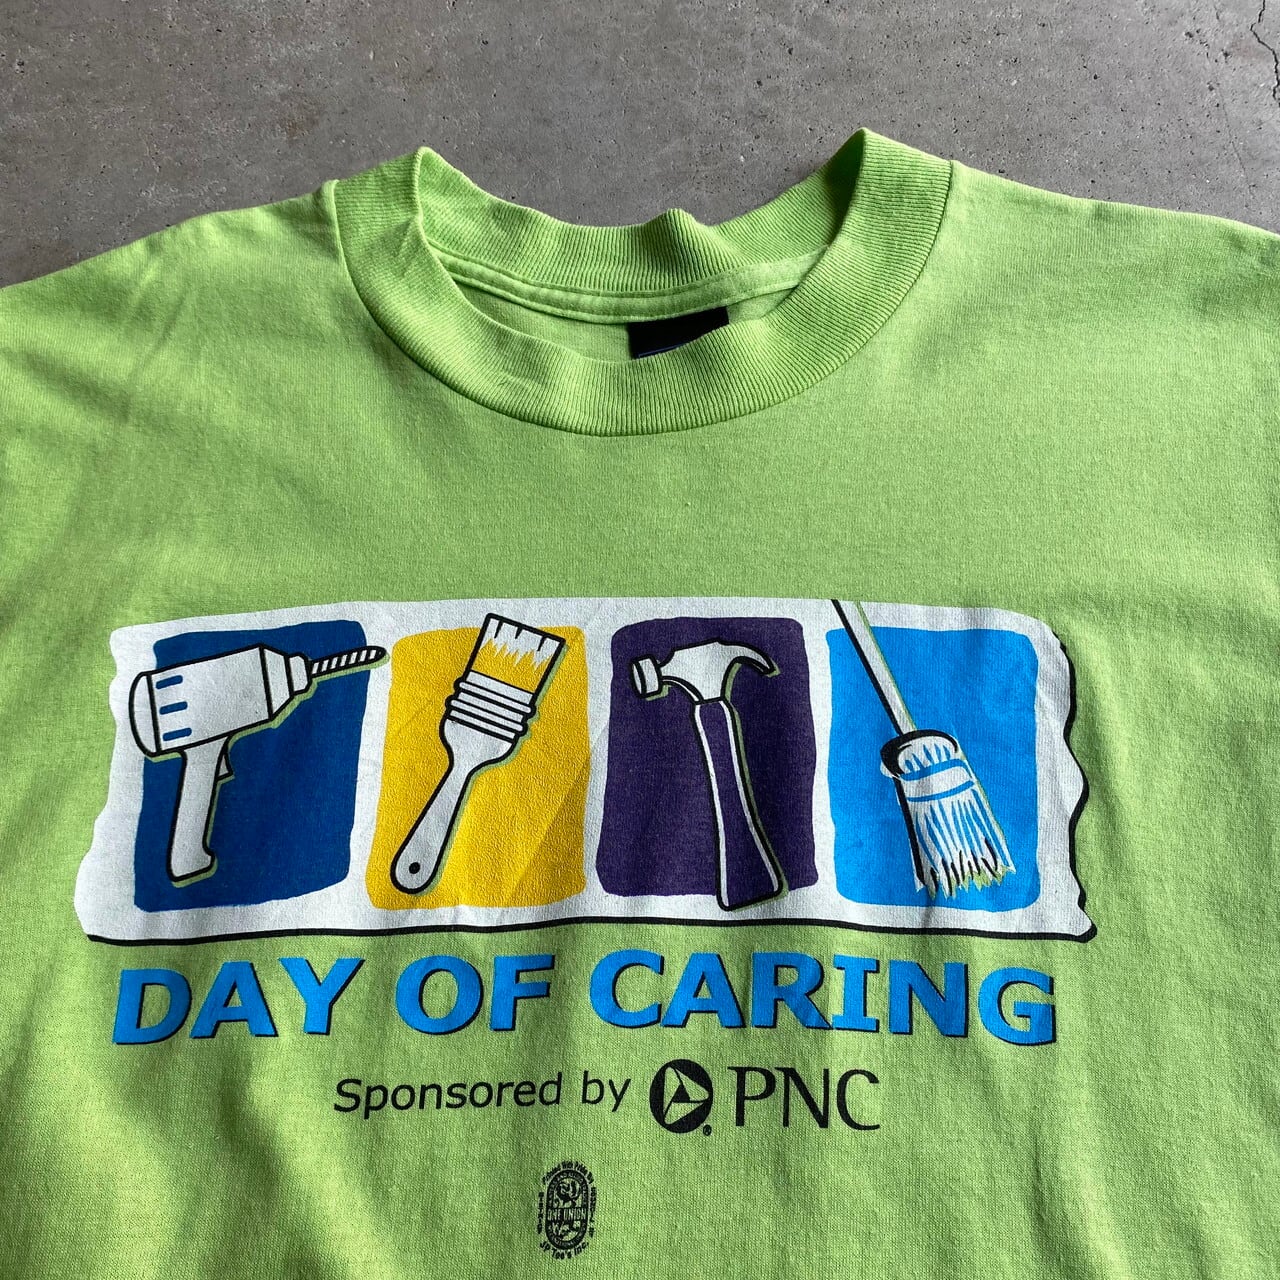 USA製 DAY OF CARING by PNC アドバタイジング 企業 プリントT ...